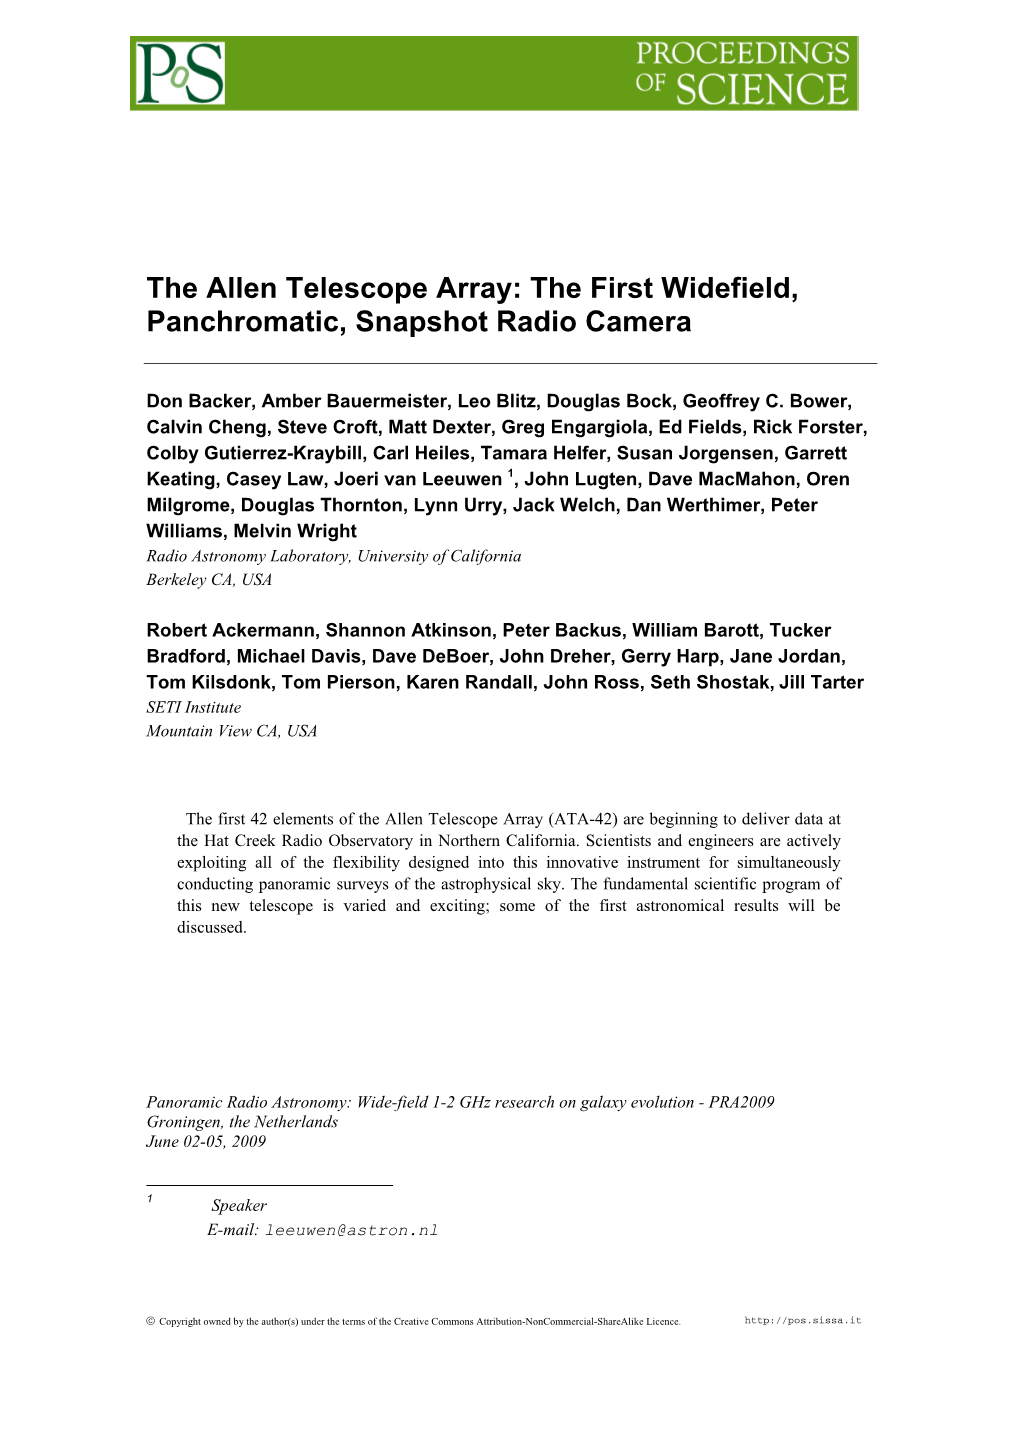 The Allen Telescope Array: the First Widefield, Panchromatic, Snapshot Radio Camera